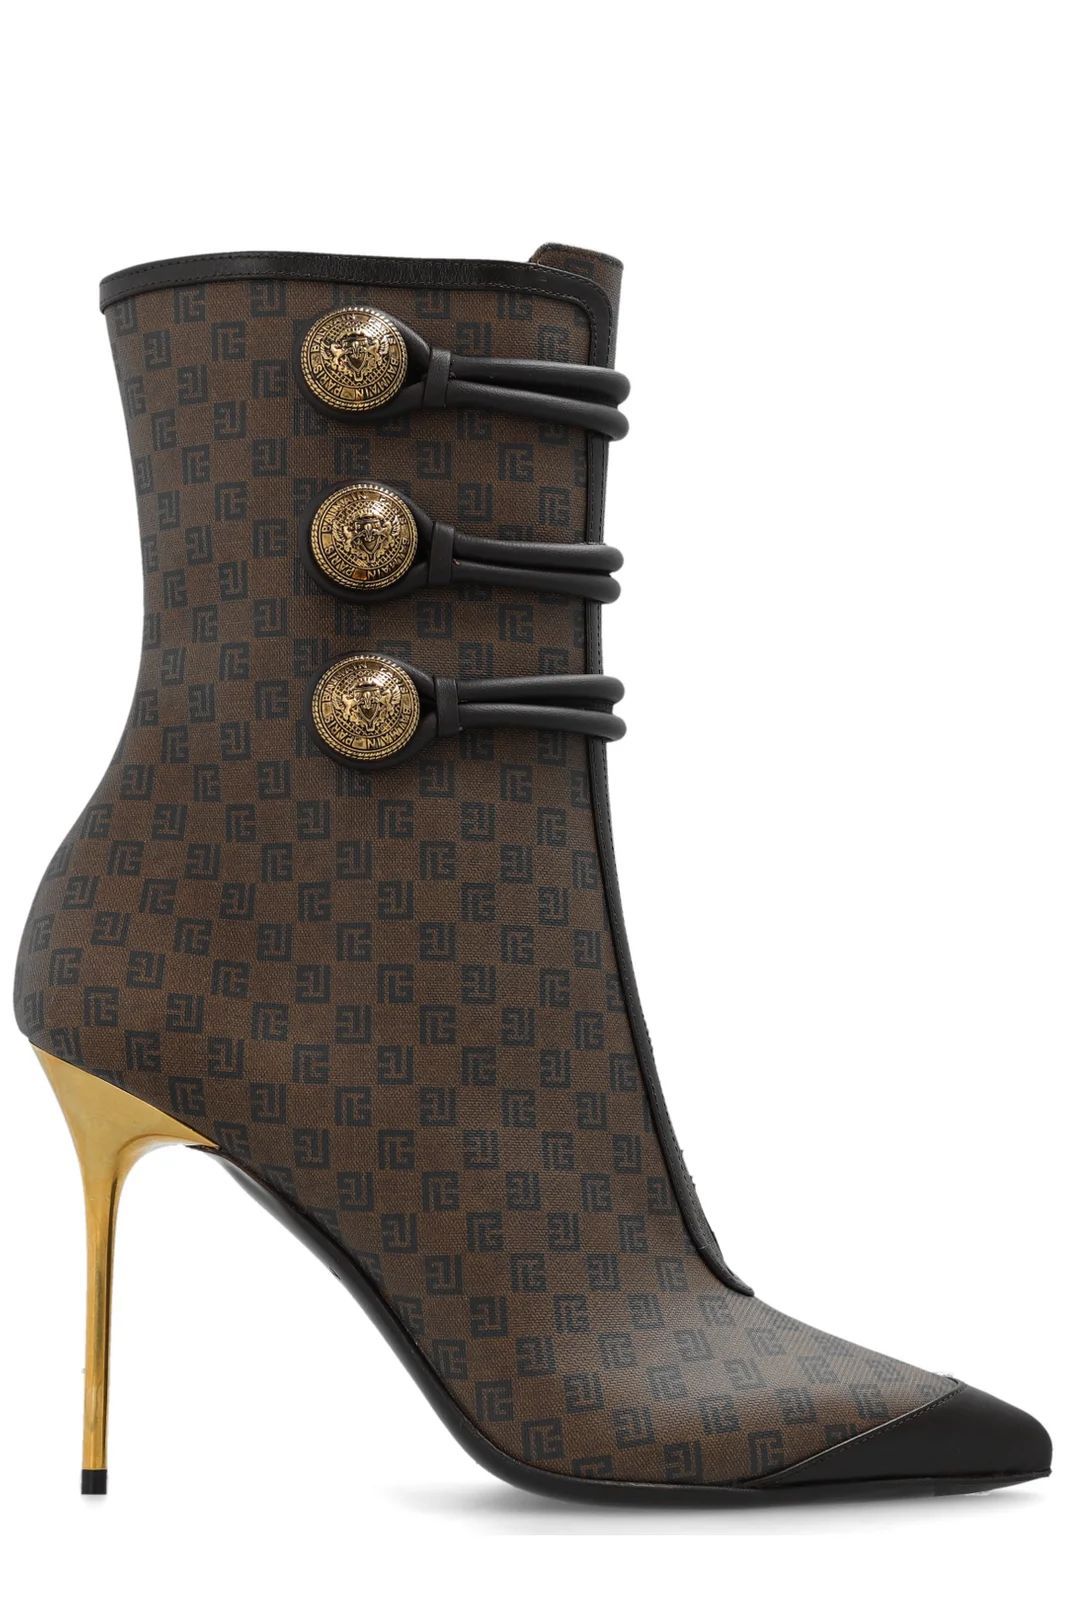 Balmain Monogrammed Heeled Ankle Boots | Cettire Global